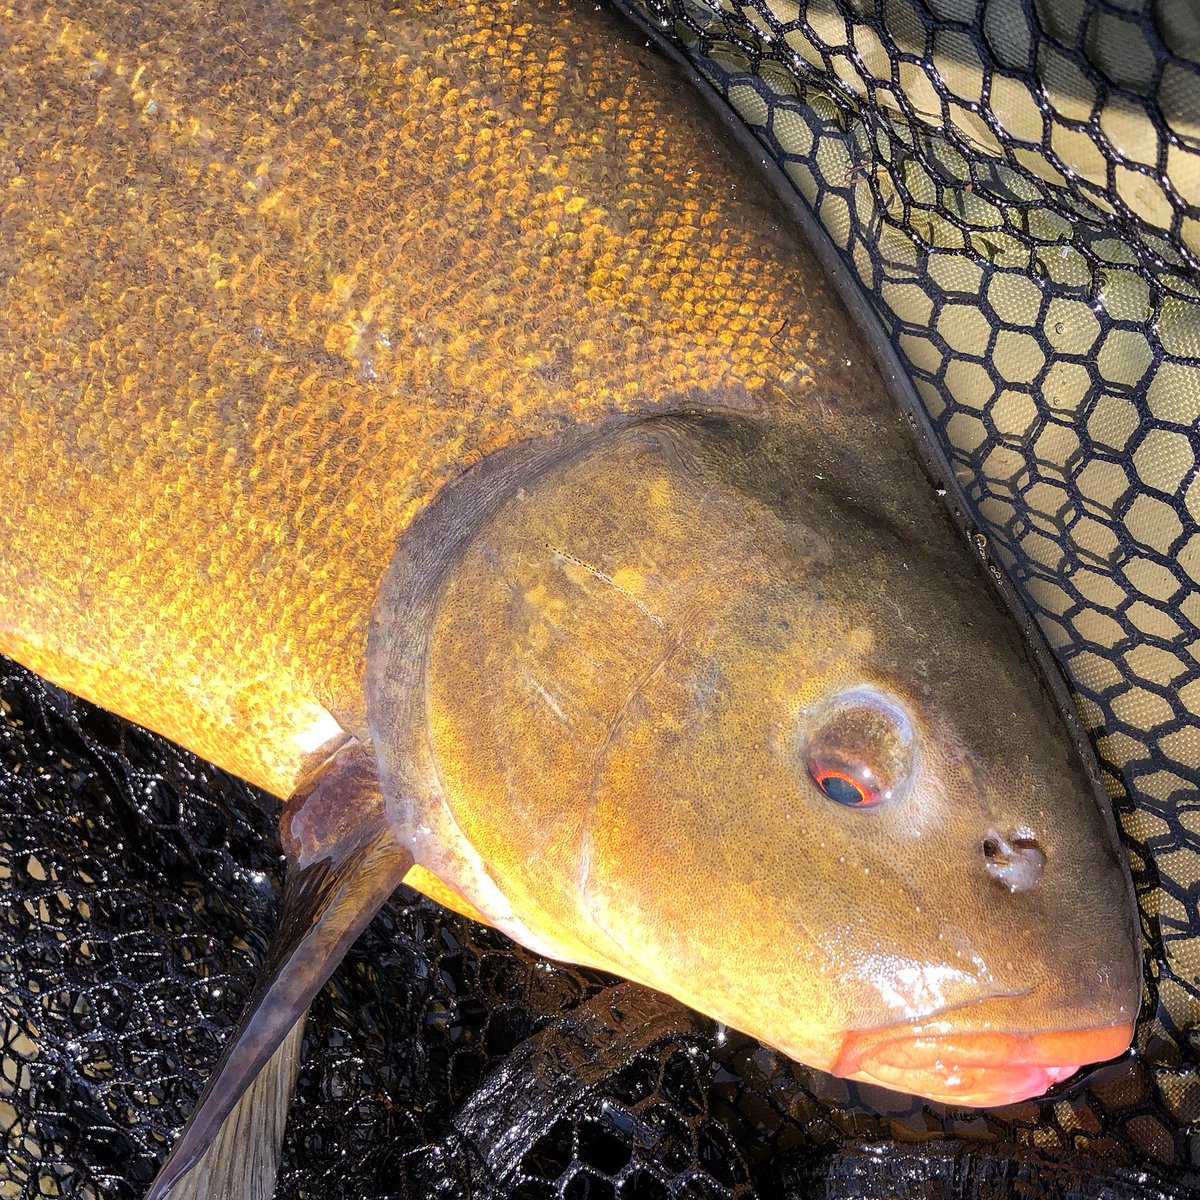 The water warms up and with it the tench get really hungry for our offered baits🎣. I love these beautiful fish😍.
▪️
#tenchfishing #tench #schleie #schleienangeln #beautifulfish #angeln #friedfischangeln #fishing #specimenfishing #lakefishing #freshwaterfishing #fish #fiske